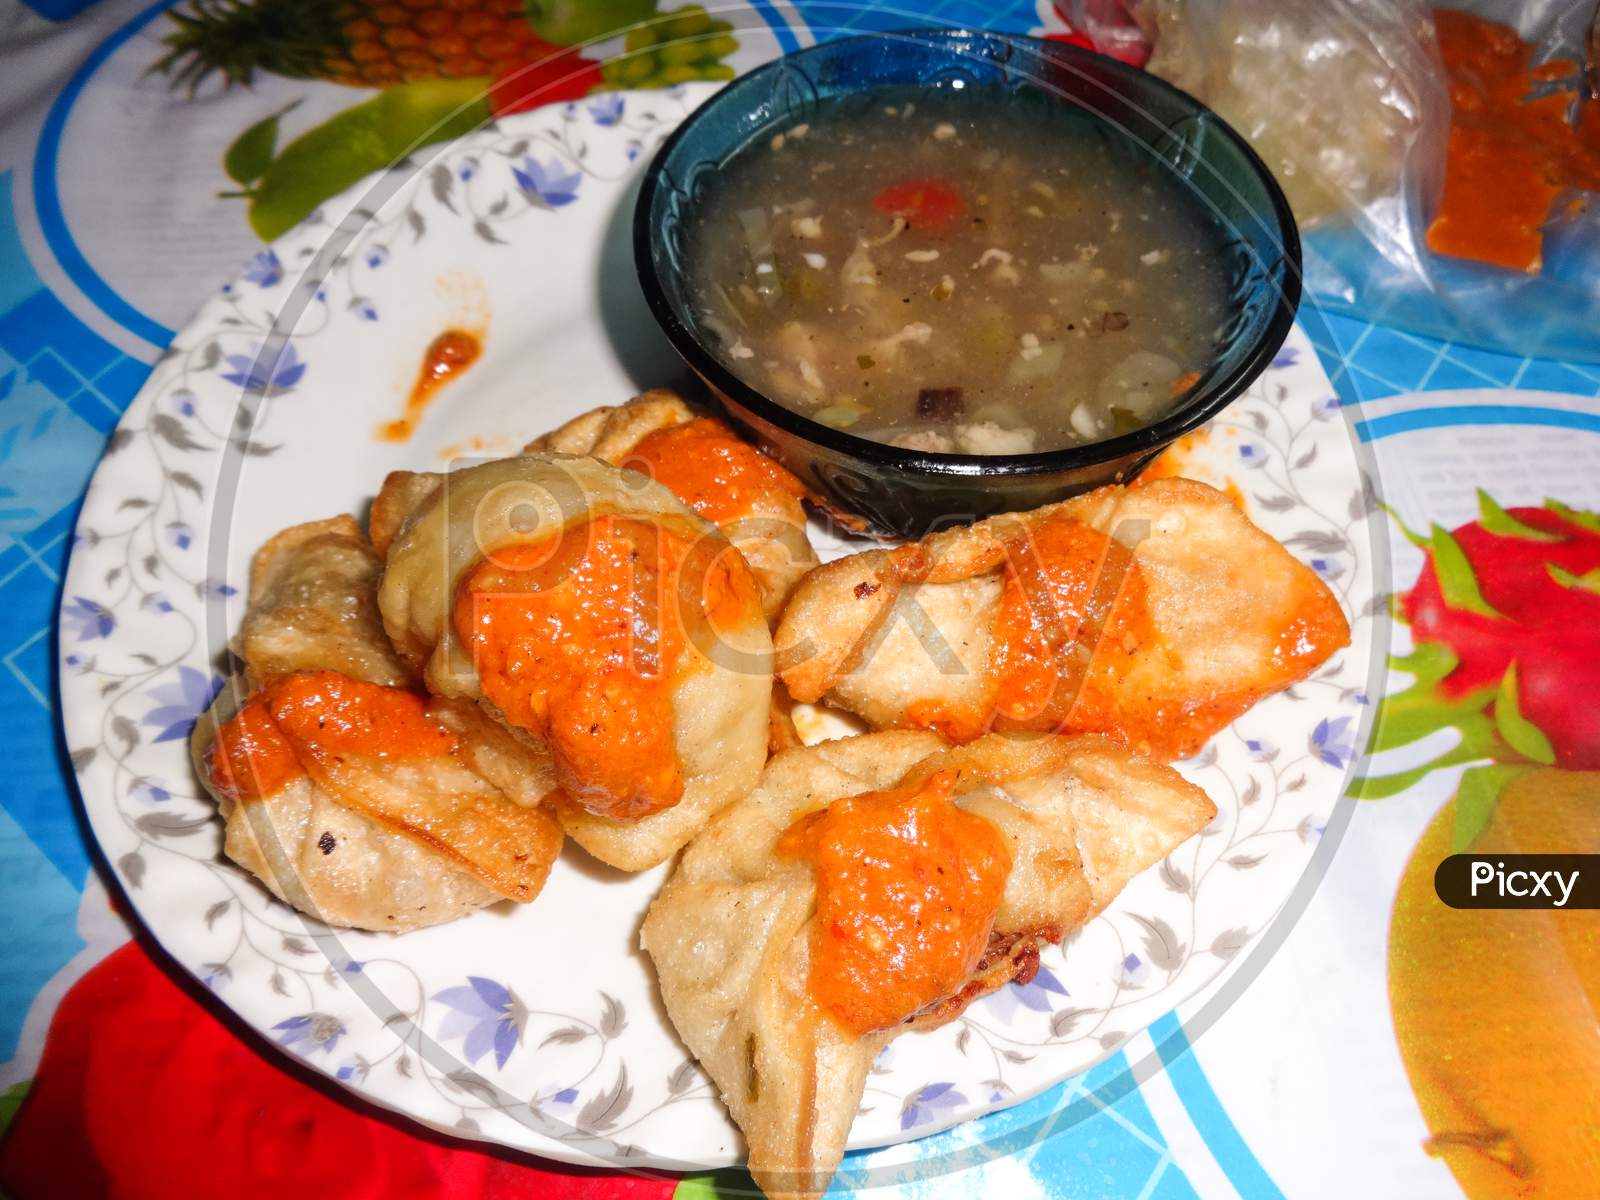 One dish of indian food momos tasty and crunchy. With chicken soup